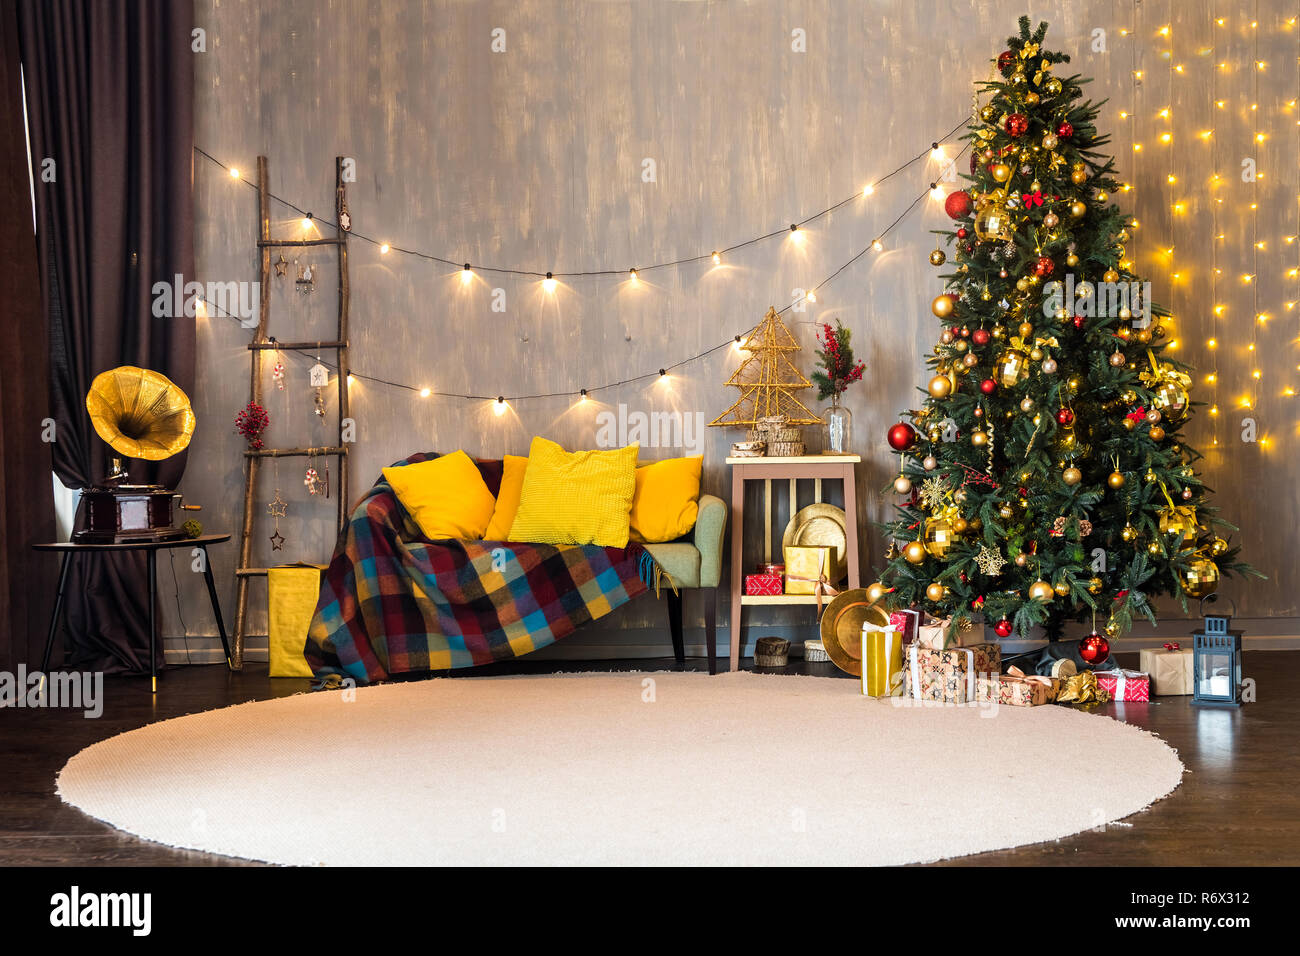 Funny colorful room with christmas interior Stock Photo